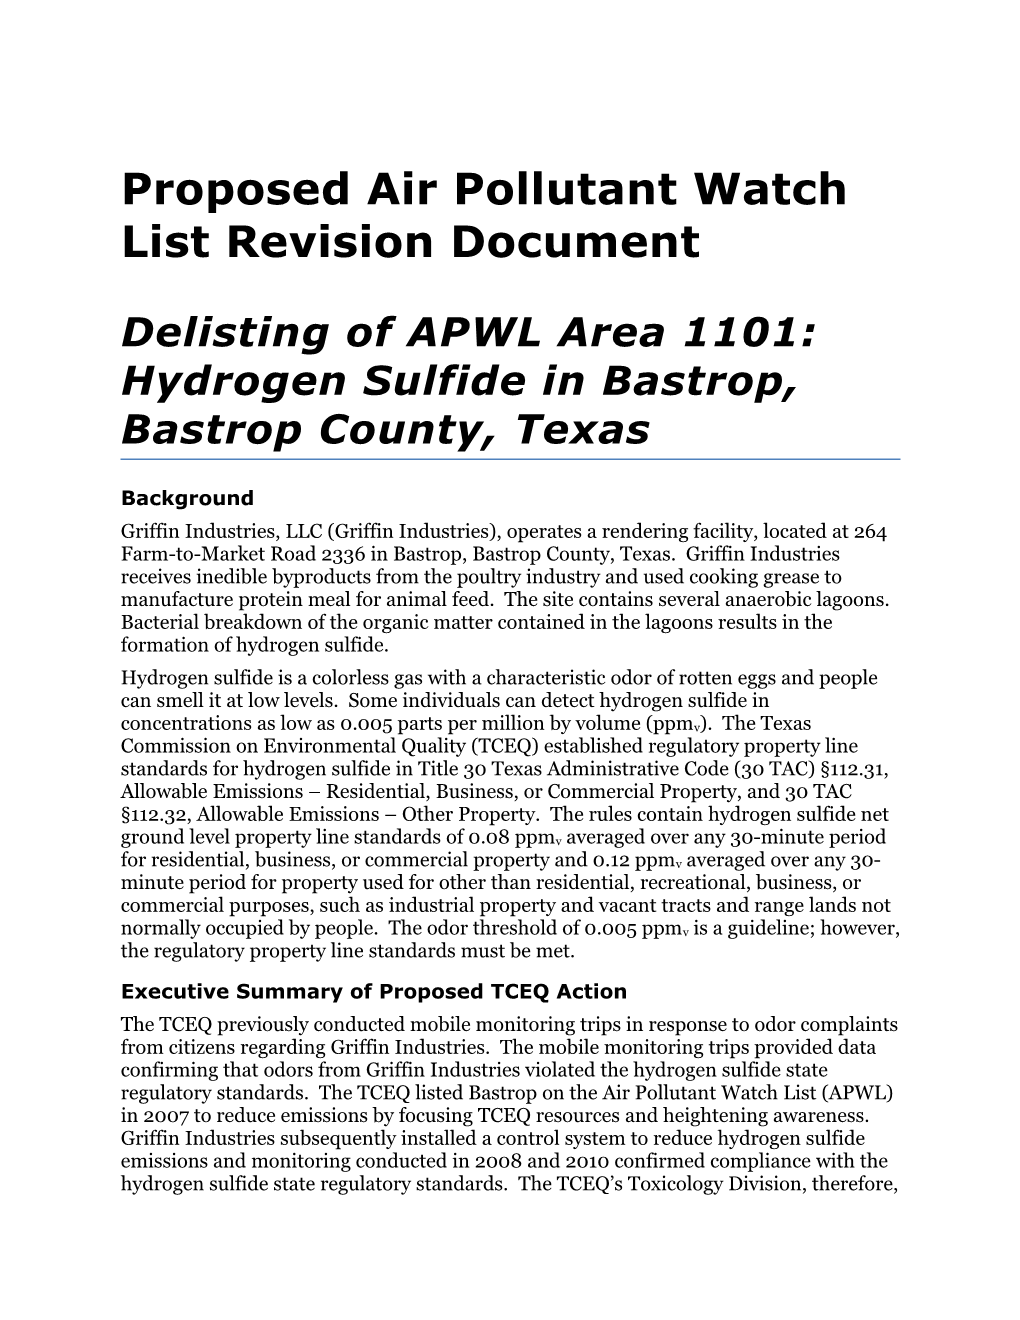 Proposed Air Pollutant Watch List Revision Document